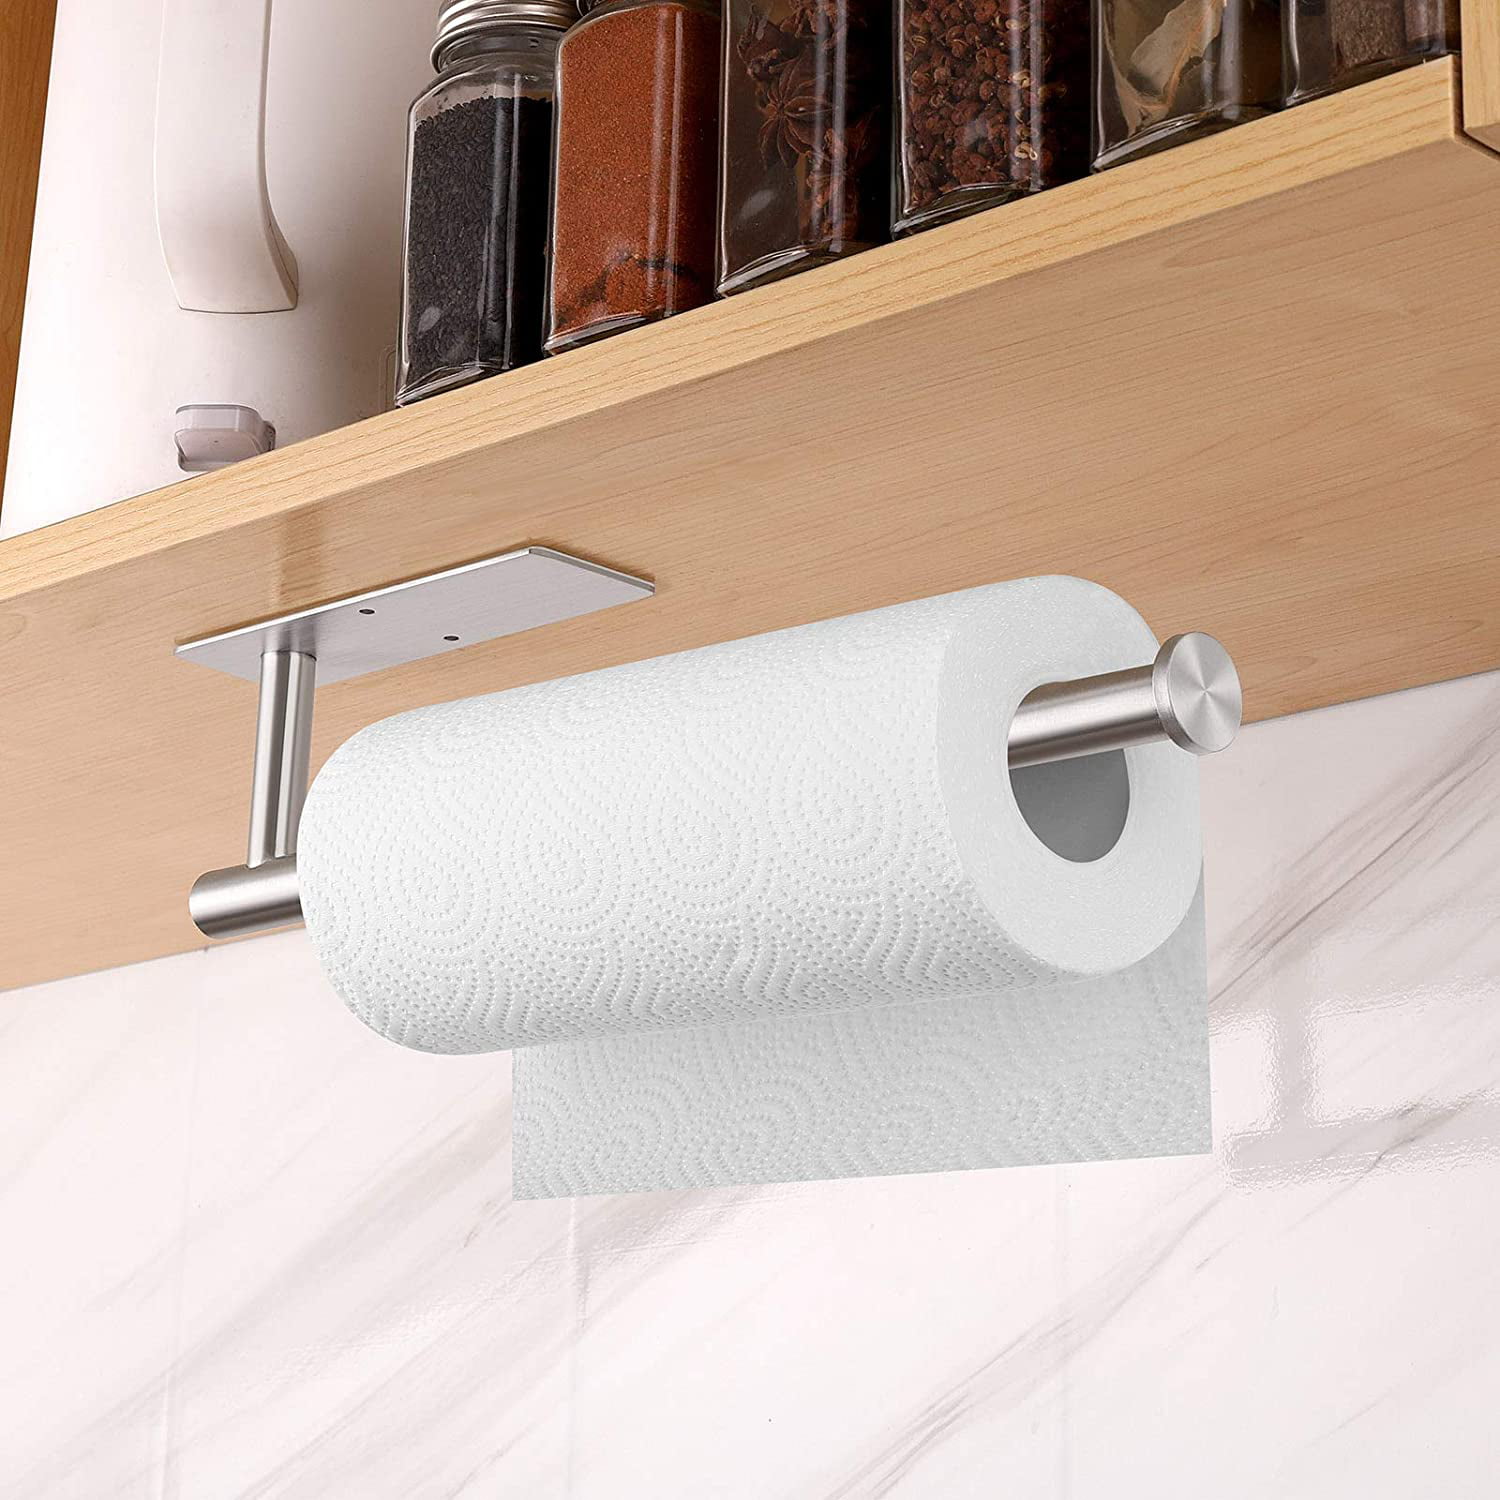 cabinets wall bathroom SUS304 Stainless Steel Silver Adhesive Paper Towel Holder for Kitchen Paper Towel Holder Under Kitchen Cabinet Wall Mount Paper Towel Holder Self Adhesive or Drilling 